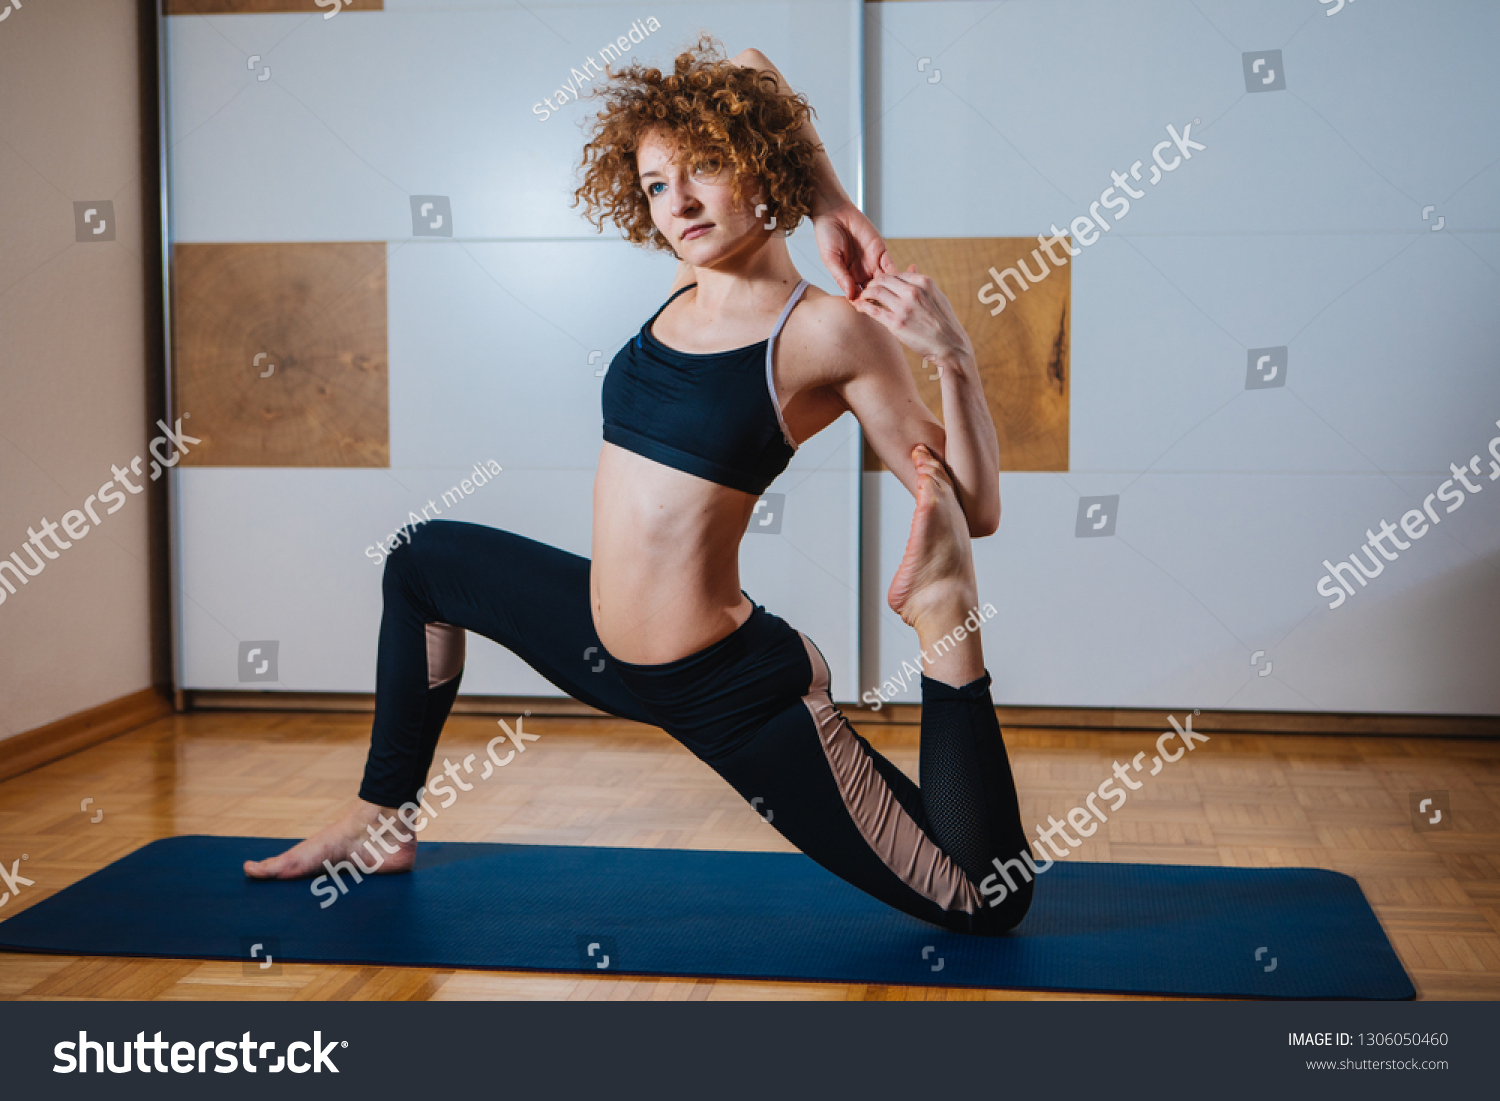 Sporty beautiful young woman practicing yoga, doing Splits Exercise, Monkey God Pose, stretching the thighs, hamstrings, groins, working out wearing black sport #1306050460